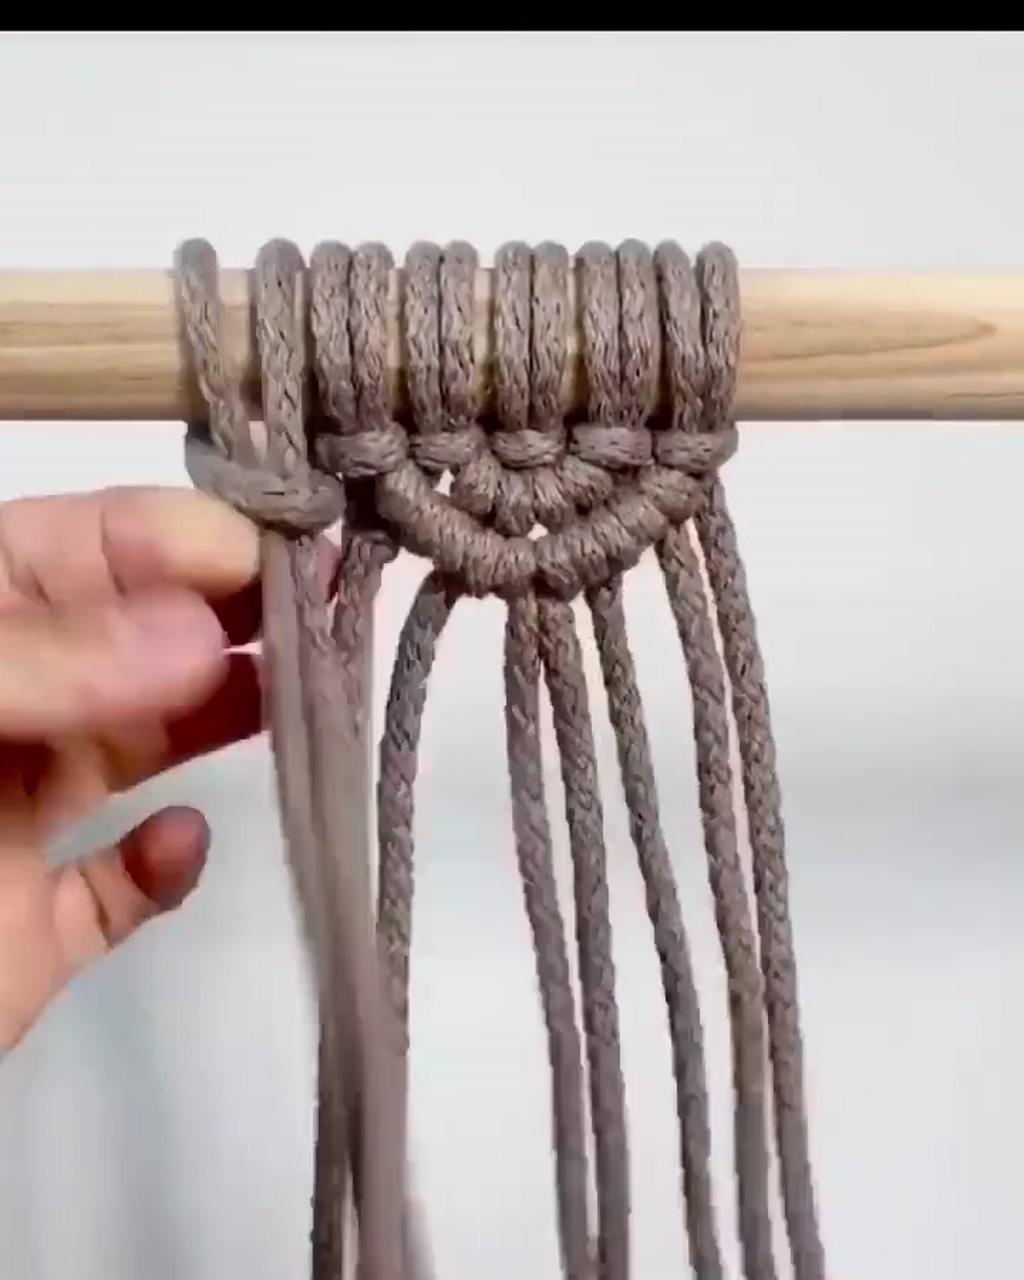 New knotting style; macrame wall hanging tutorial